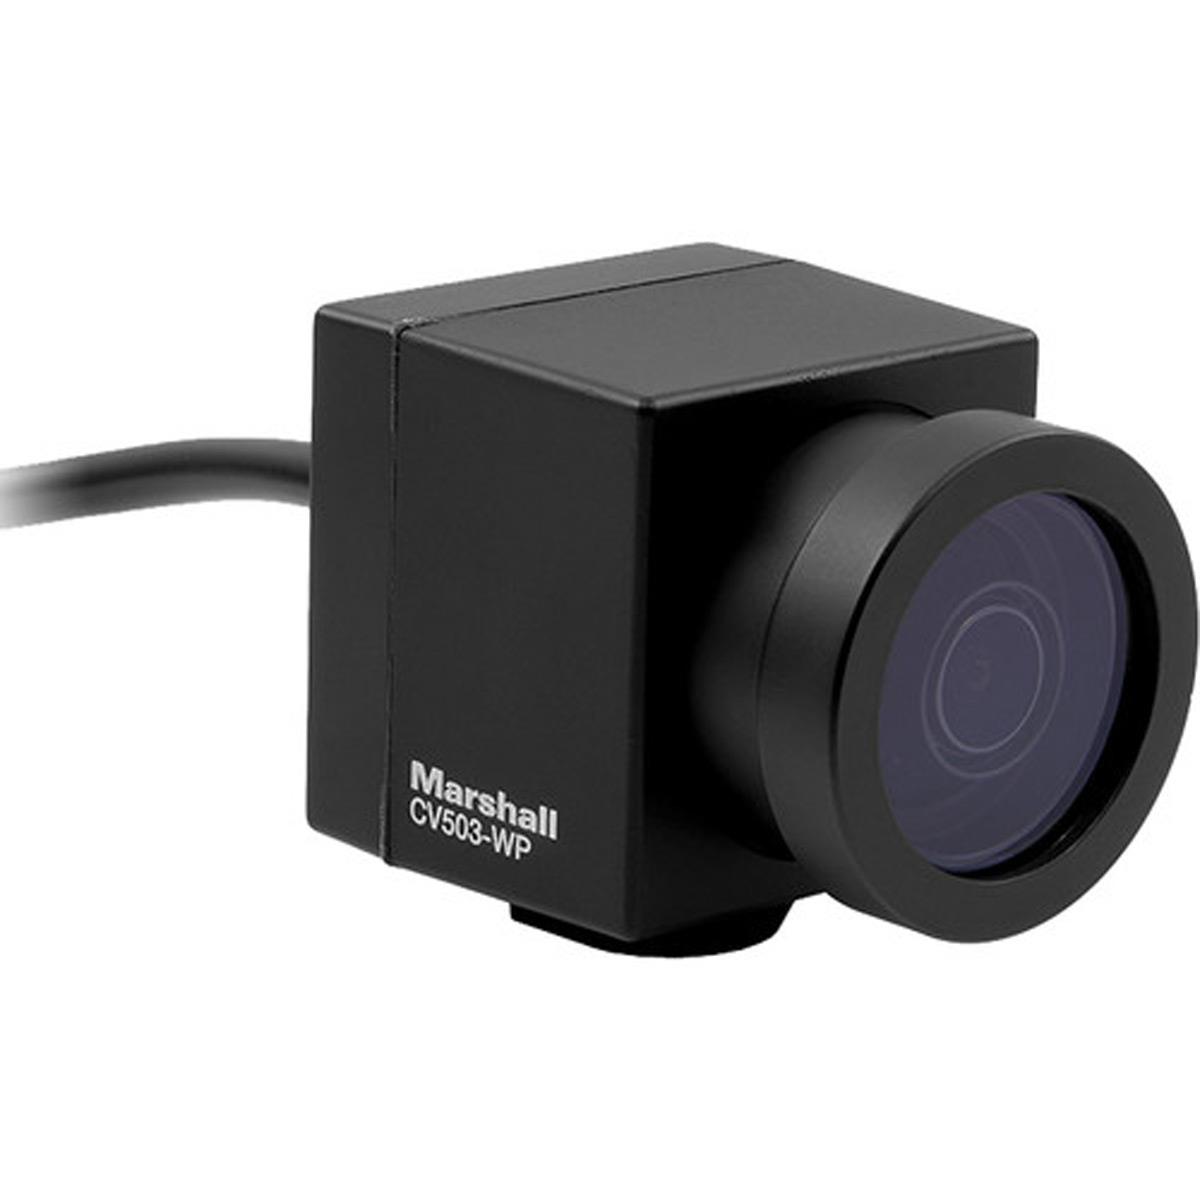 Image of Marshall Electronics CV503-WP All-Weather Miniature HD Camera with 3.6mm Lens